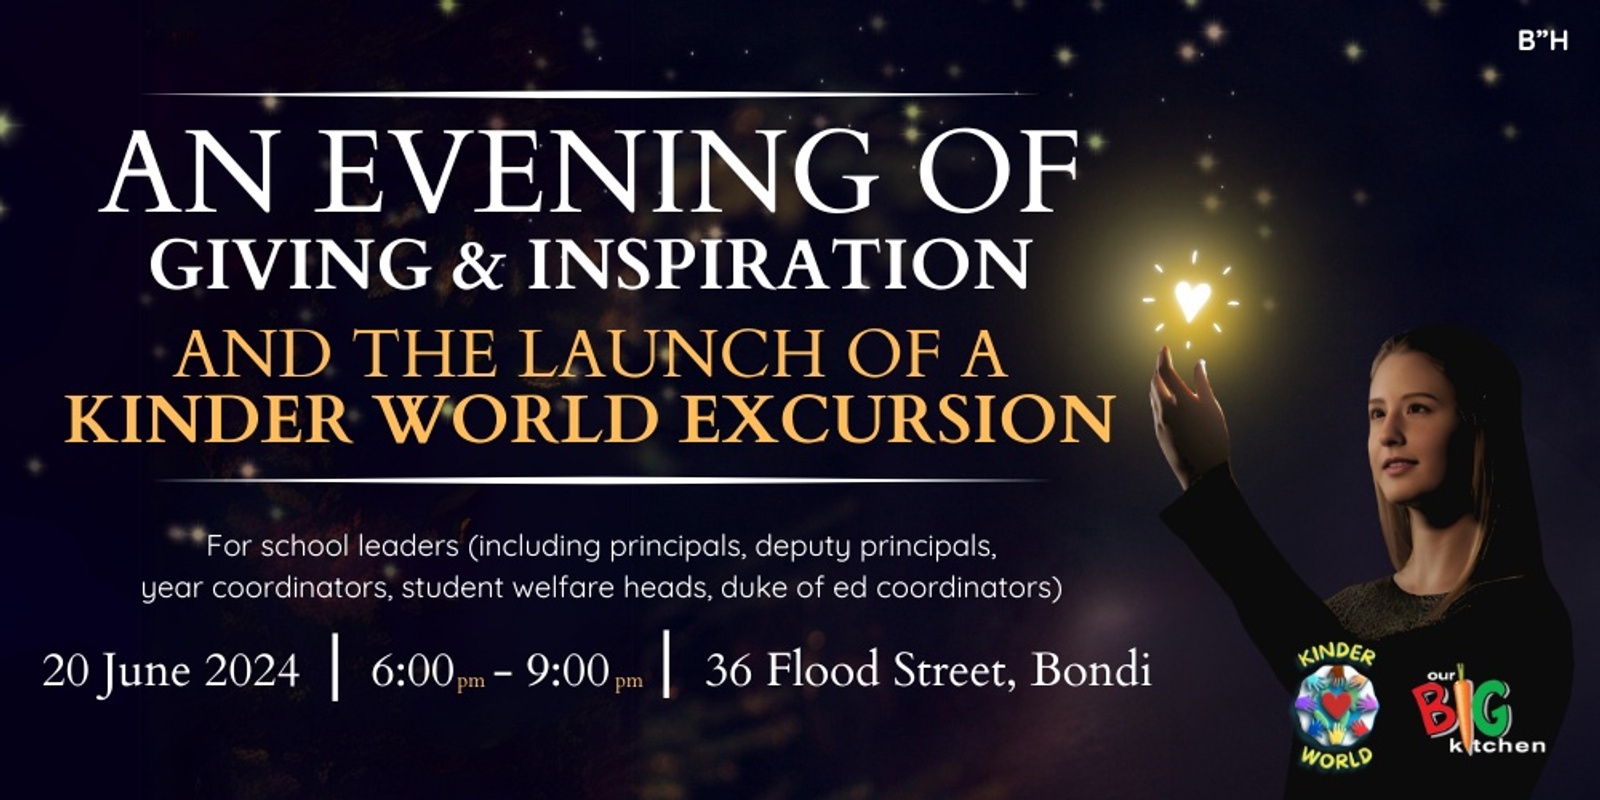 Banner image for An Evening of Giving & Inspiration and The Launch of a Kinder World Excursion